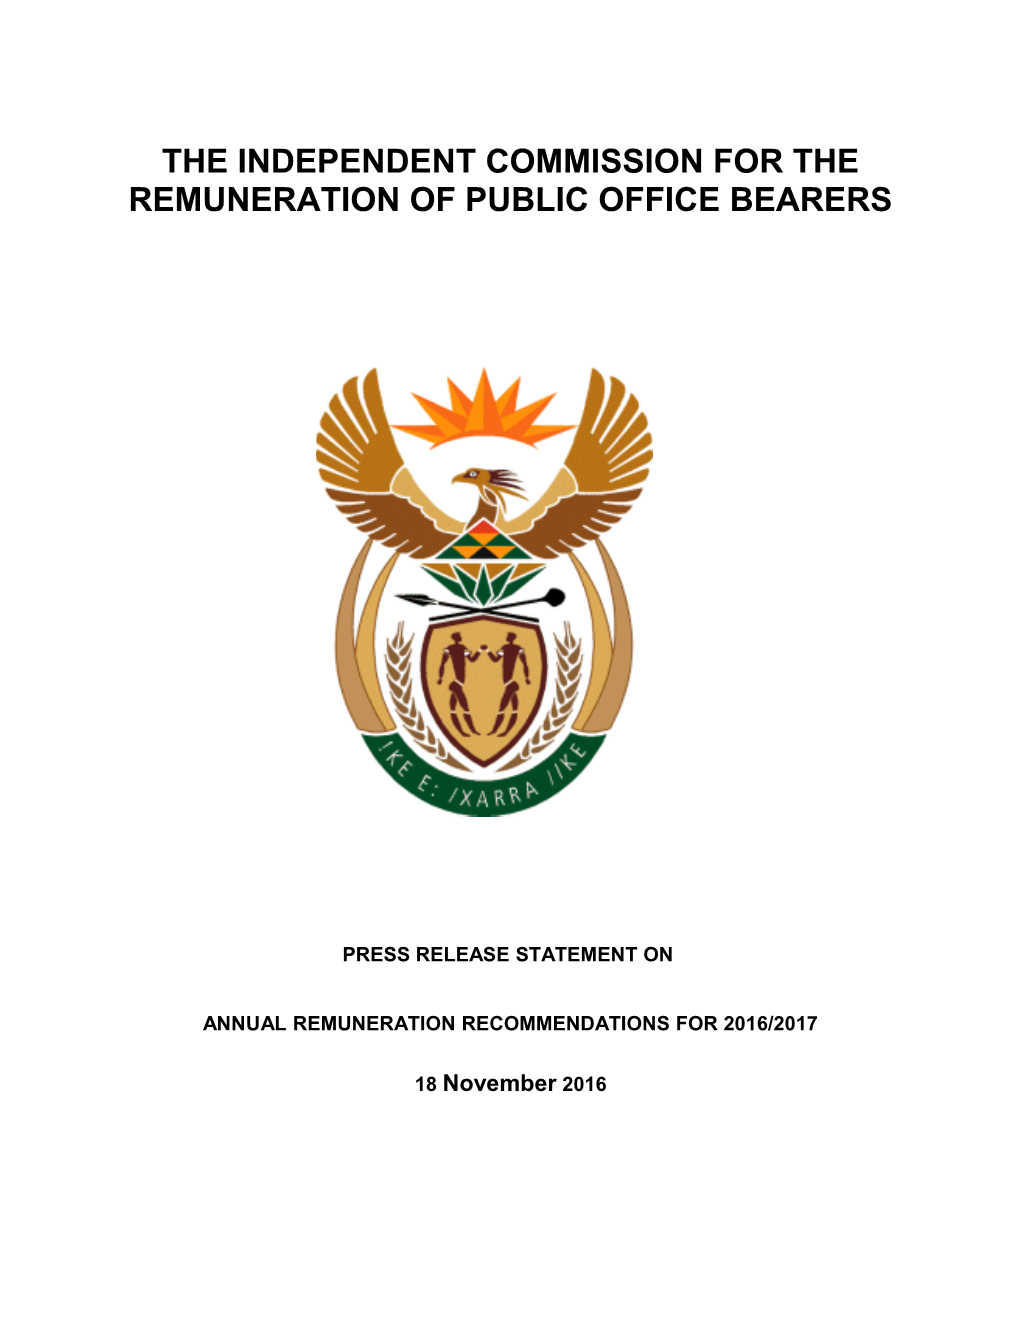 Independent Commission for the Remuneration of Public Office Bearers